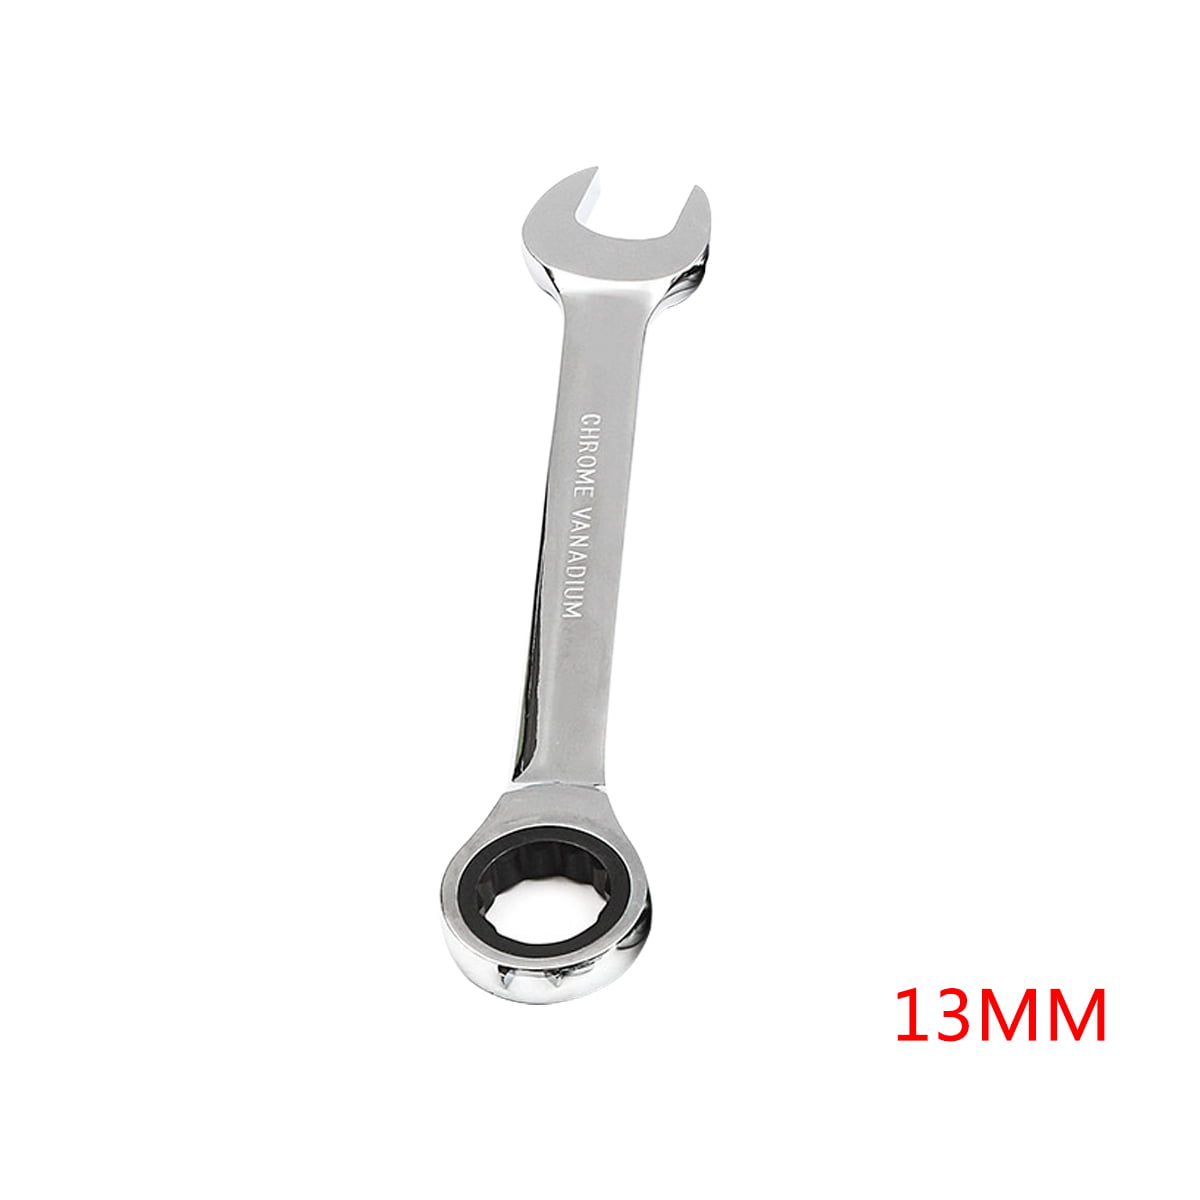 Fengyuanhong 6mm-32mm Gear Wrench Chrome Vanadium Steel Metric Fixed Head Ratchet Spanner Hand Tools，6mm